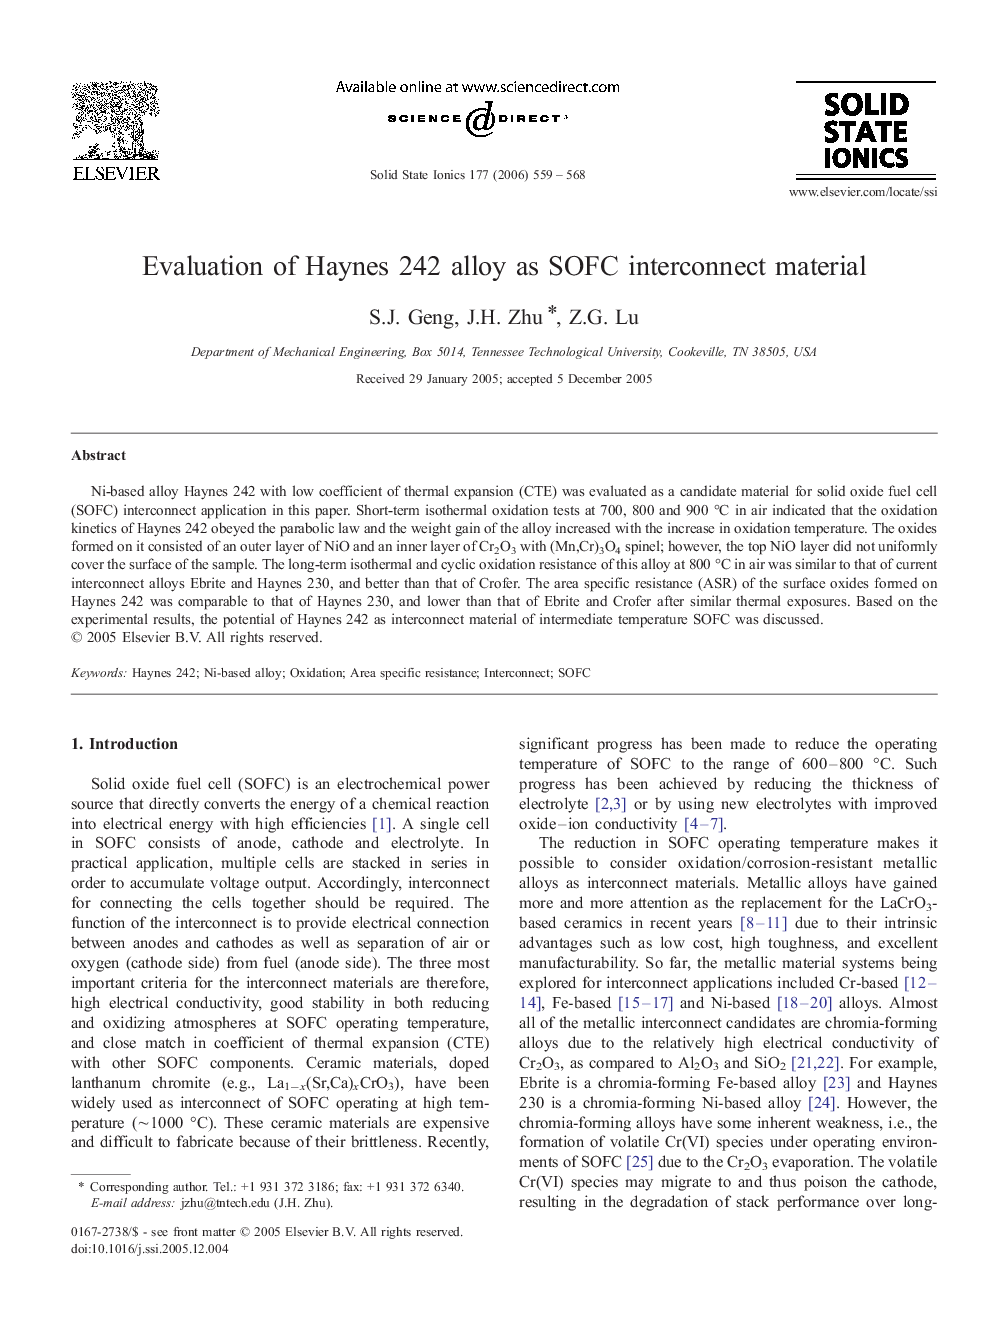 Evaluation of Haynes 242 alloy as SOFC interconnect material